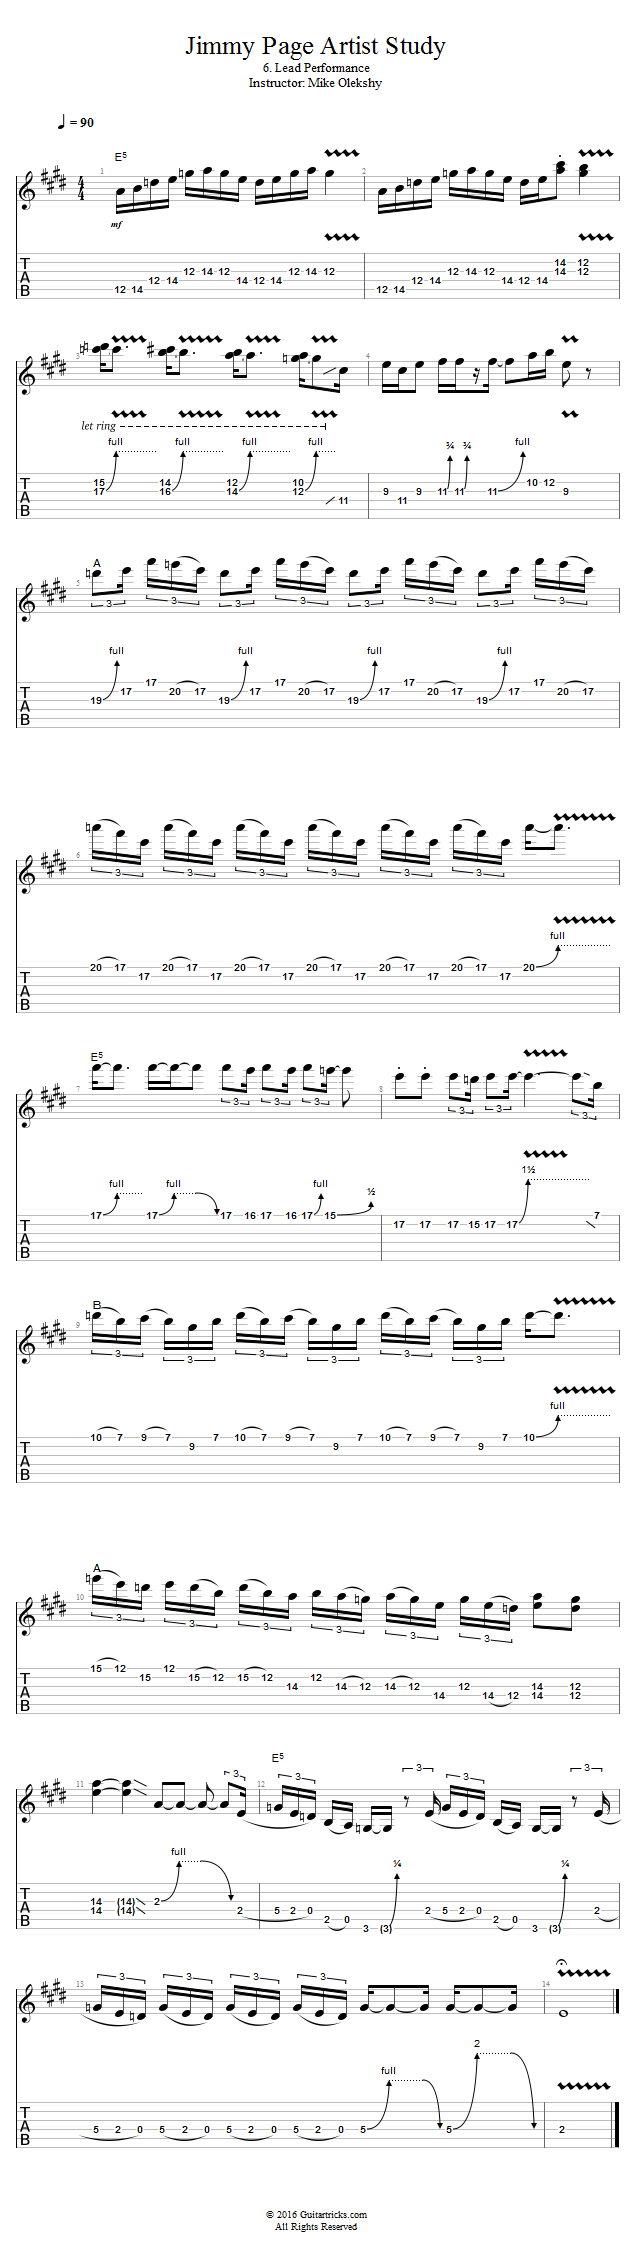 Lead Performance song notation